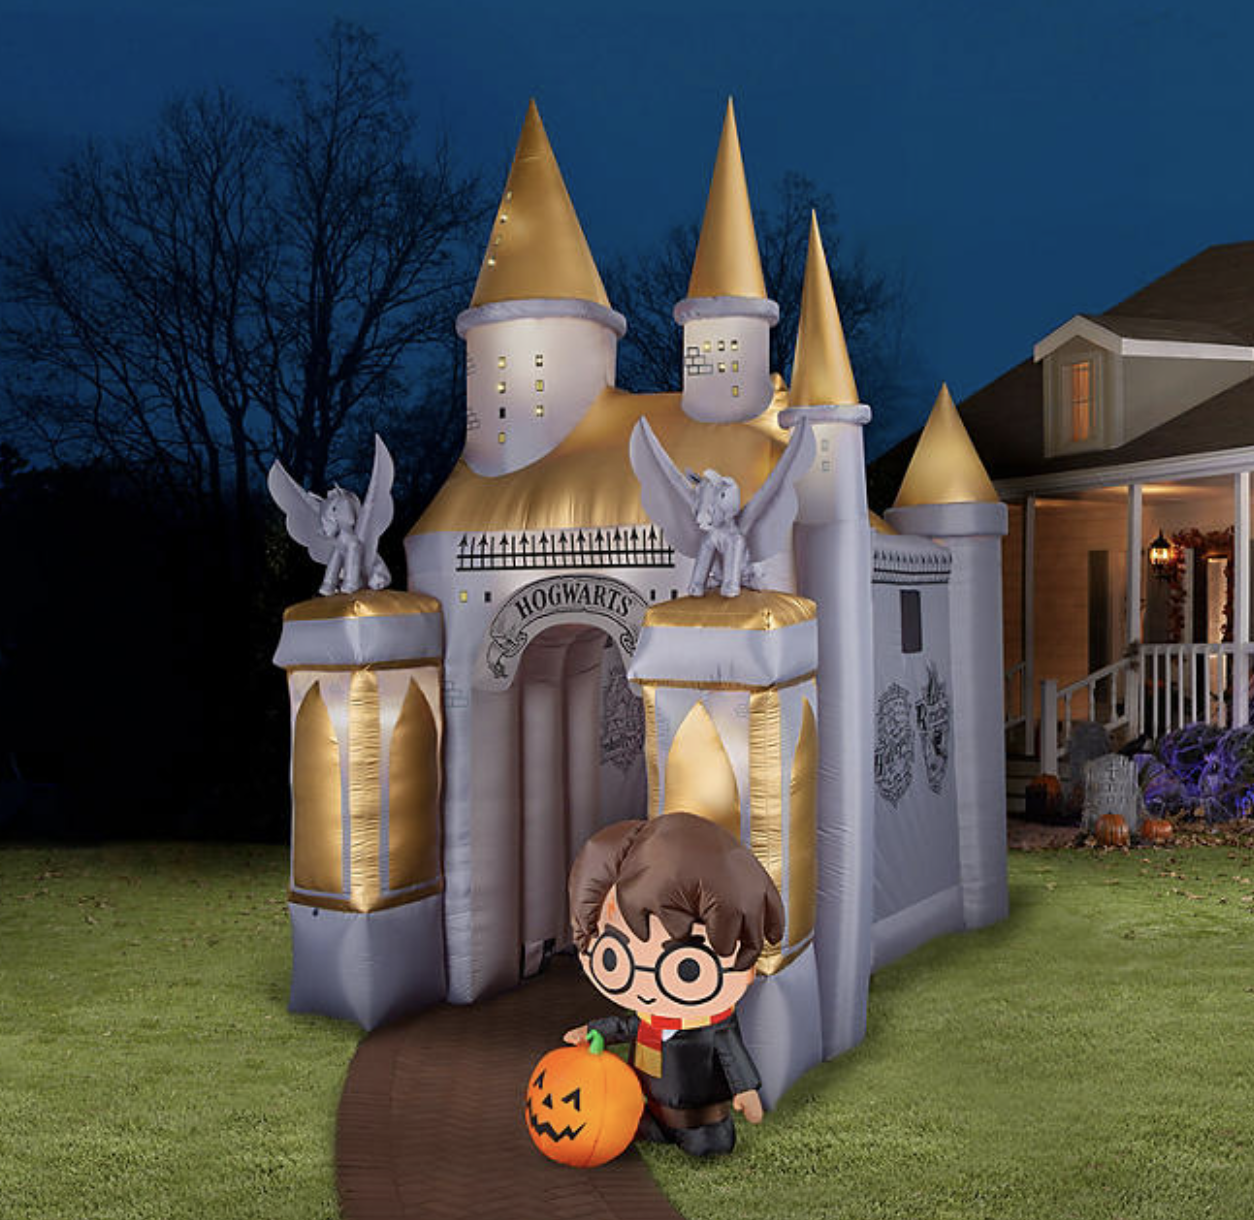 Halloween Creepy Zombie Lawn Decor Animated for Party for Front Door | eBay